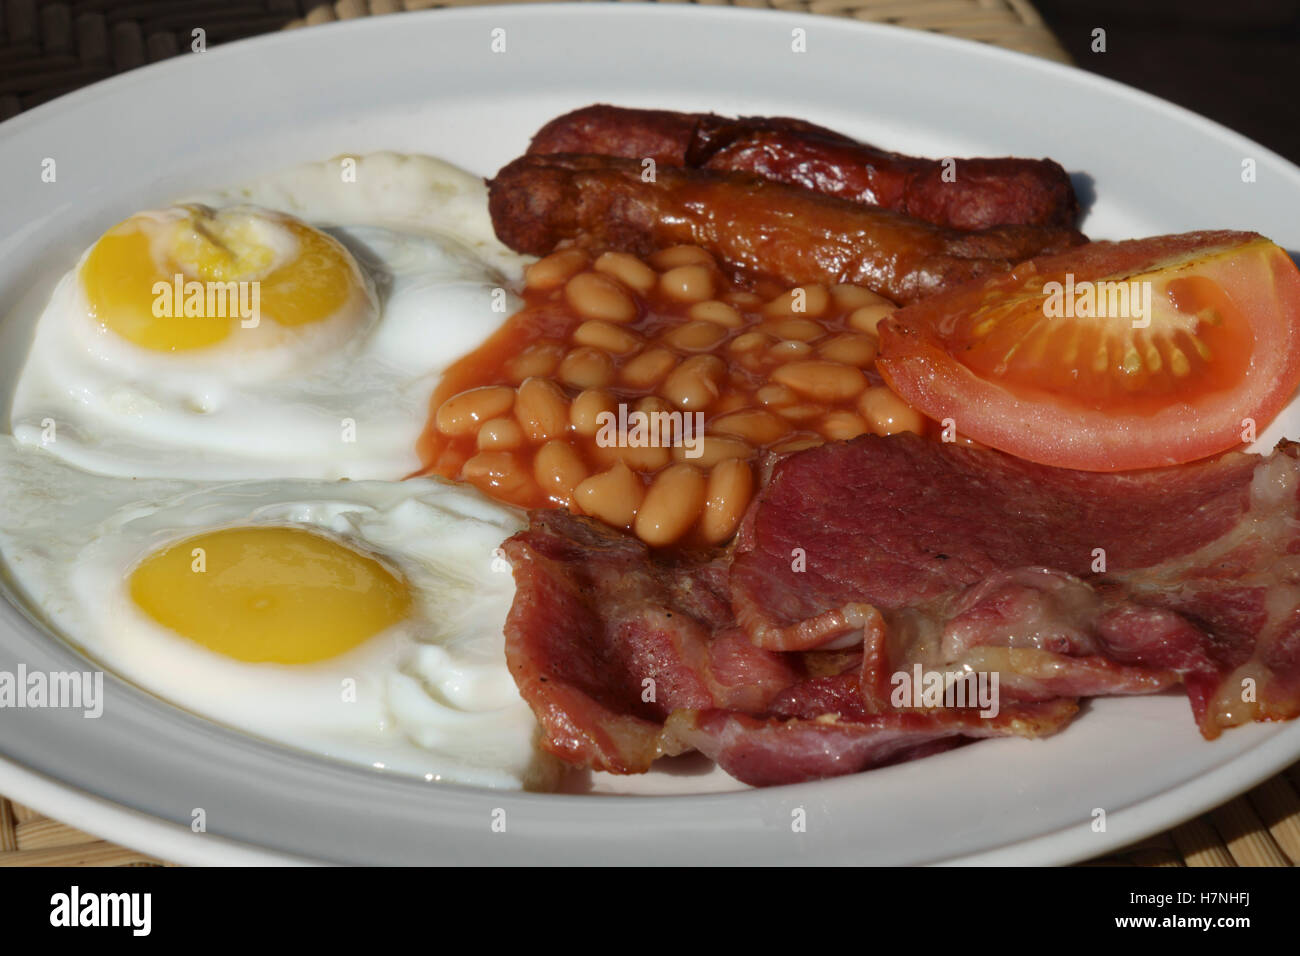 English breakfast served by a hotel in Malta - two fried eggs, rashers of local bacon, two sausages, tomato, baked beans. Stock Photo